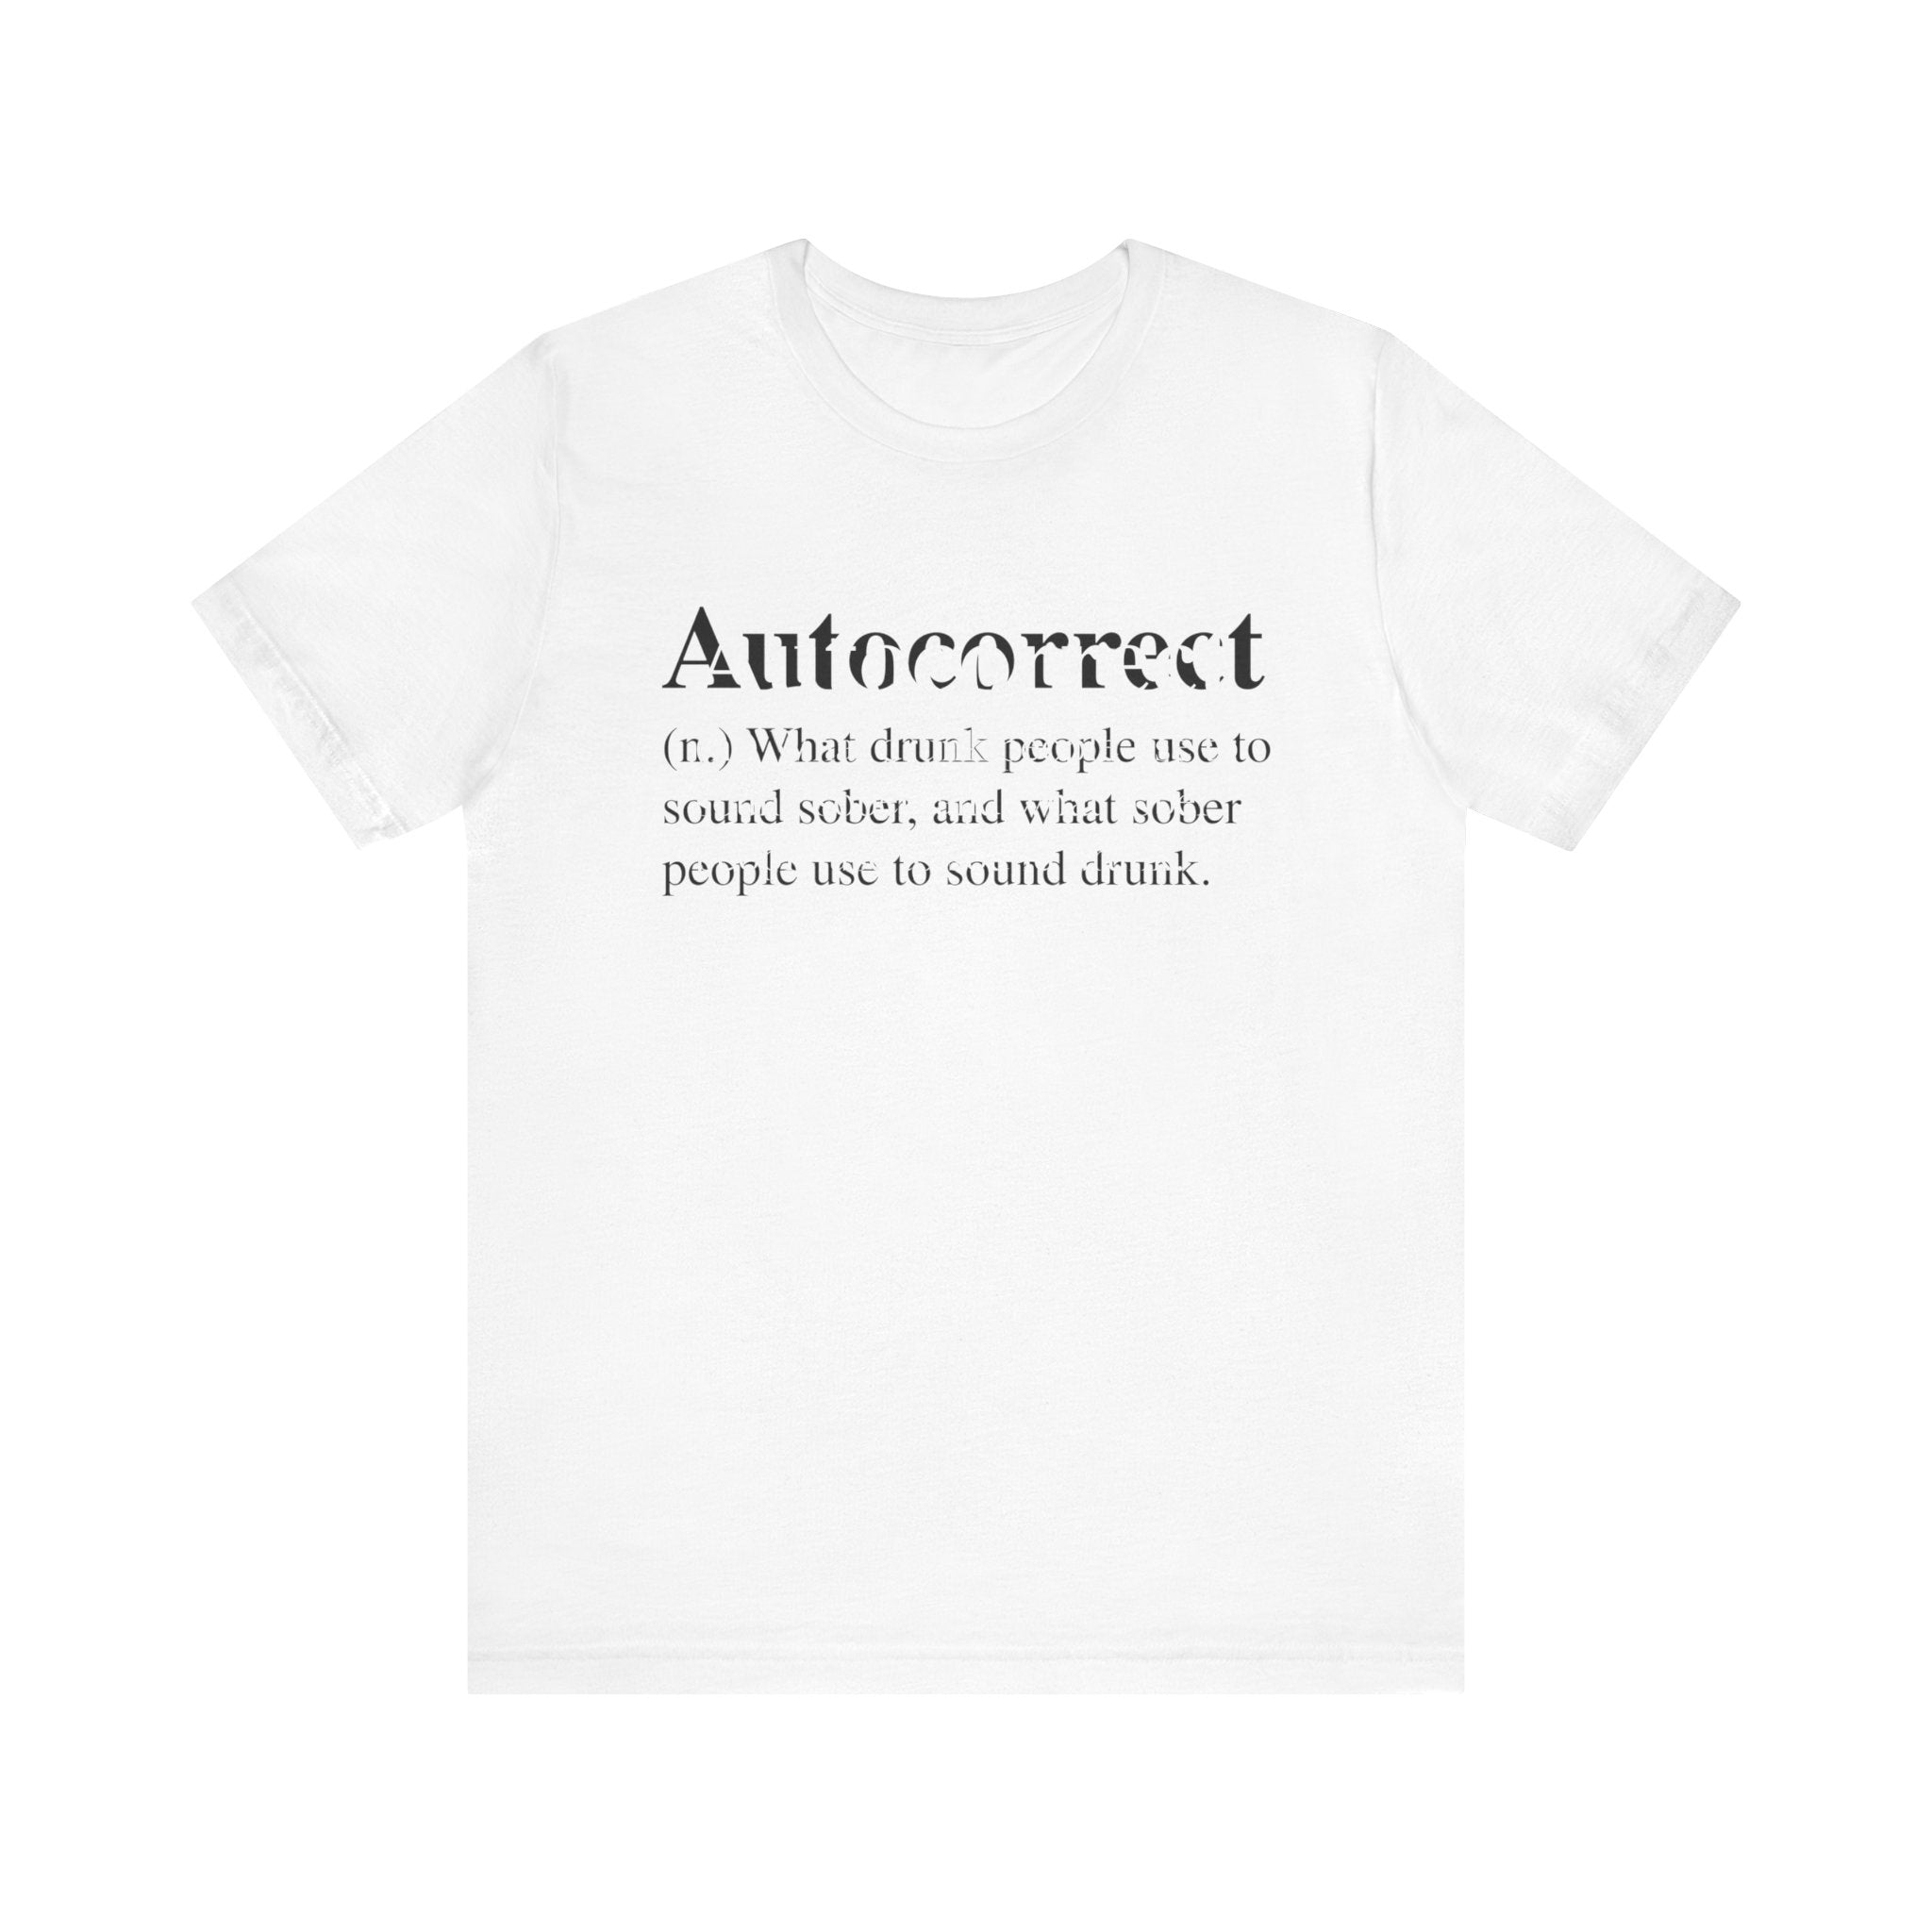 Autocorrect T-Shirt made of soft cotton with the text "auto-correct (n.) what drunk people use to sound sober, and what sober people use to sound drunk." printed in black on the front.